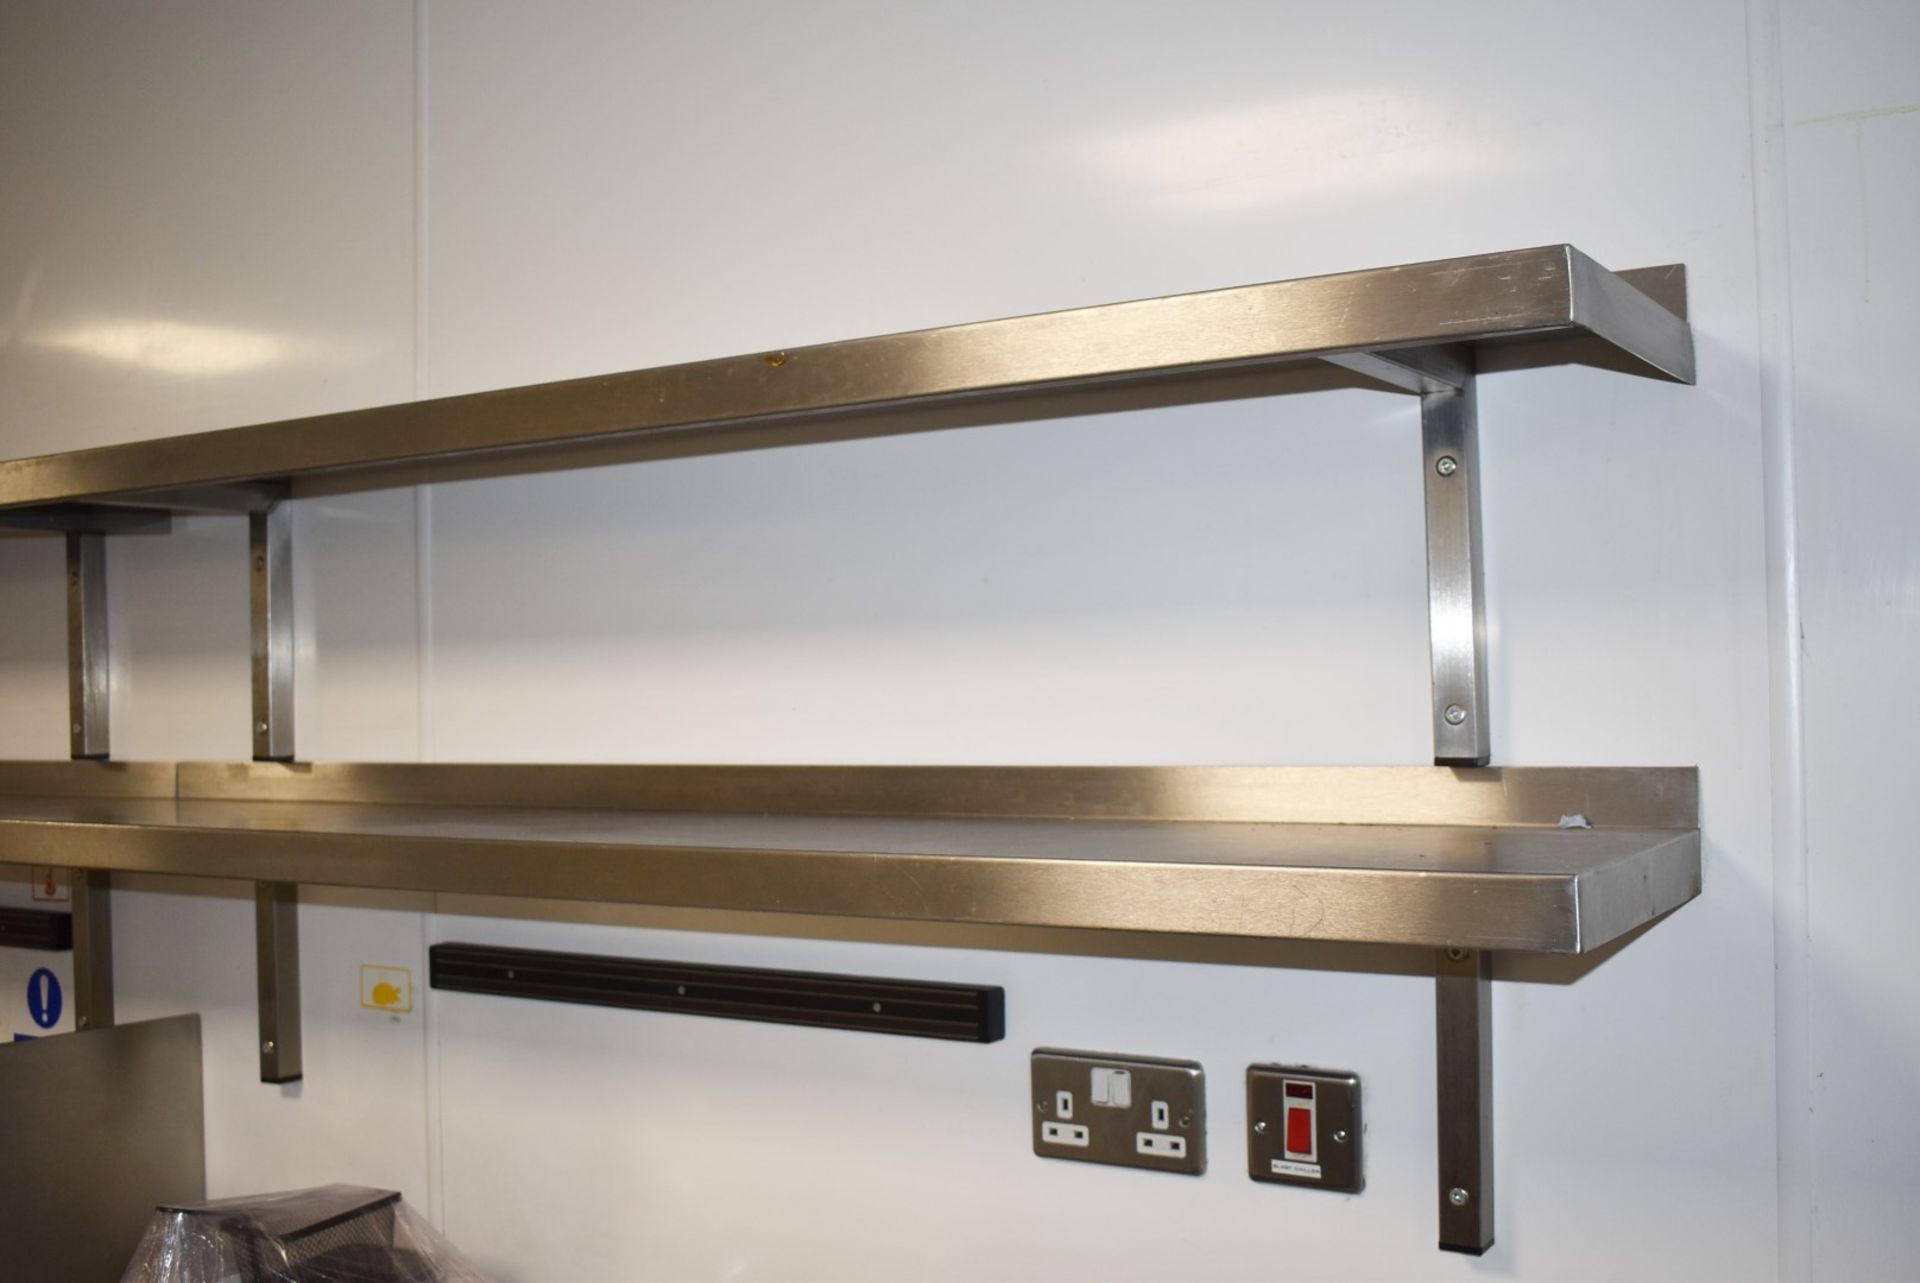 6 x Stainless Steel Wall Mounted Shelves With Mounting Brackets - Sizes W57/W104/W156 cms 2 of Each - Image 5 of 5